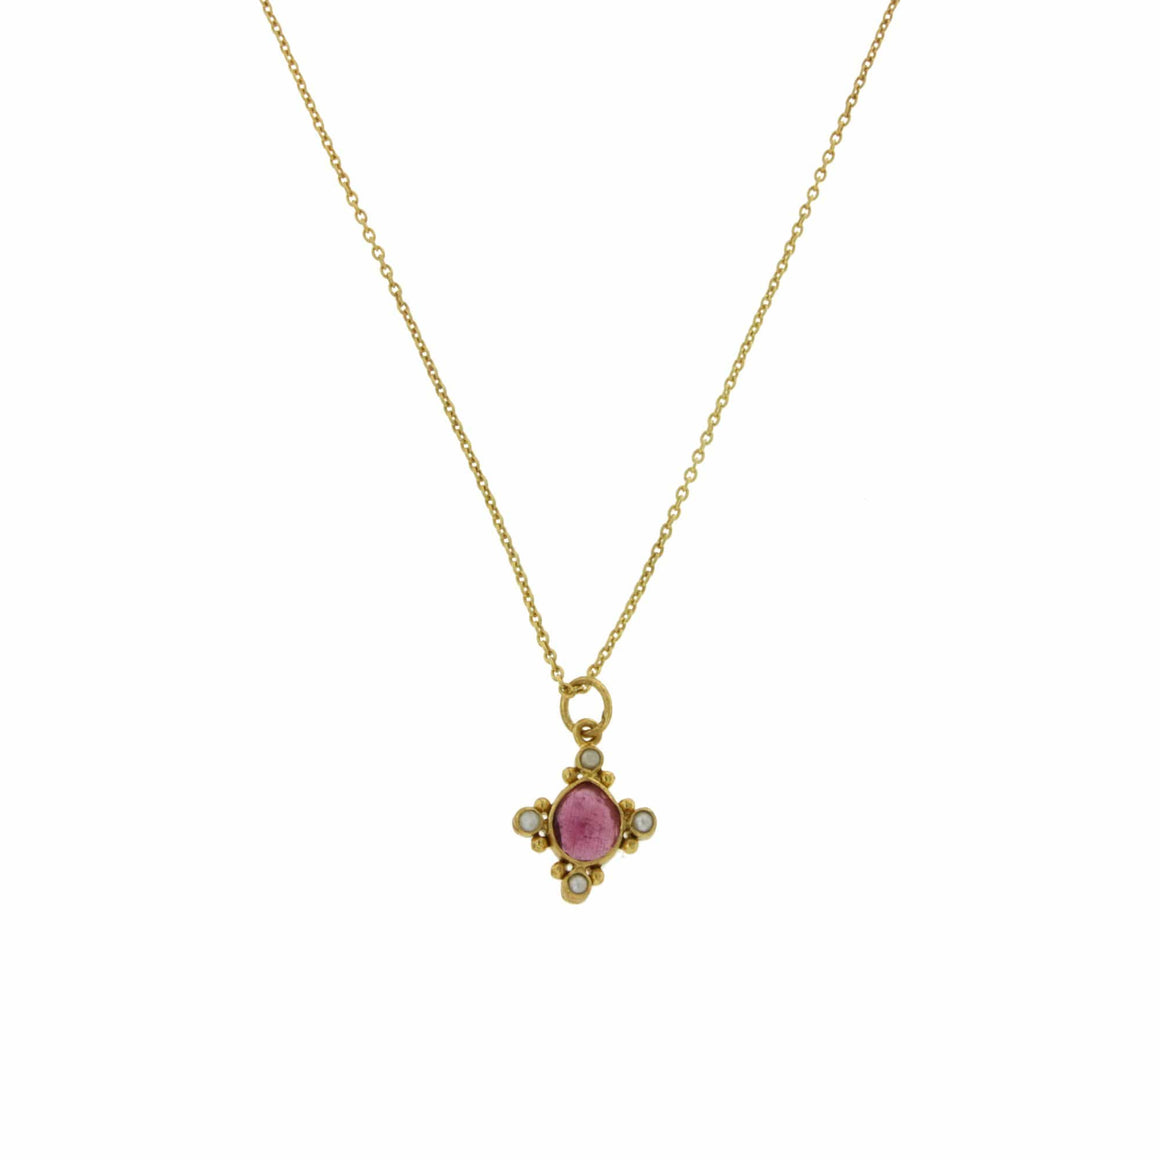 Manjusha Jewels Necklaces Ruby Flower Drop Pendant in Ruby and Pearls